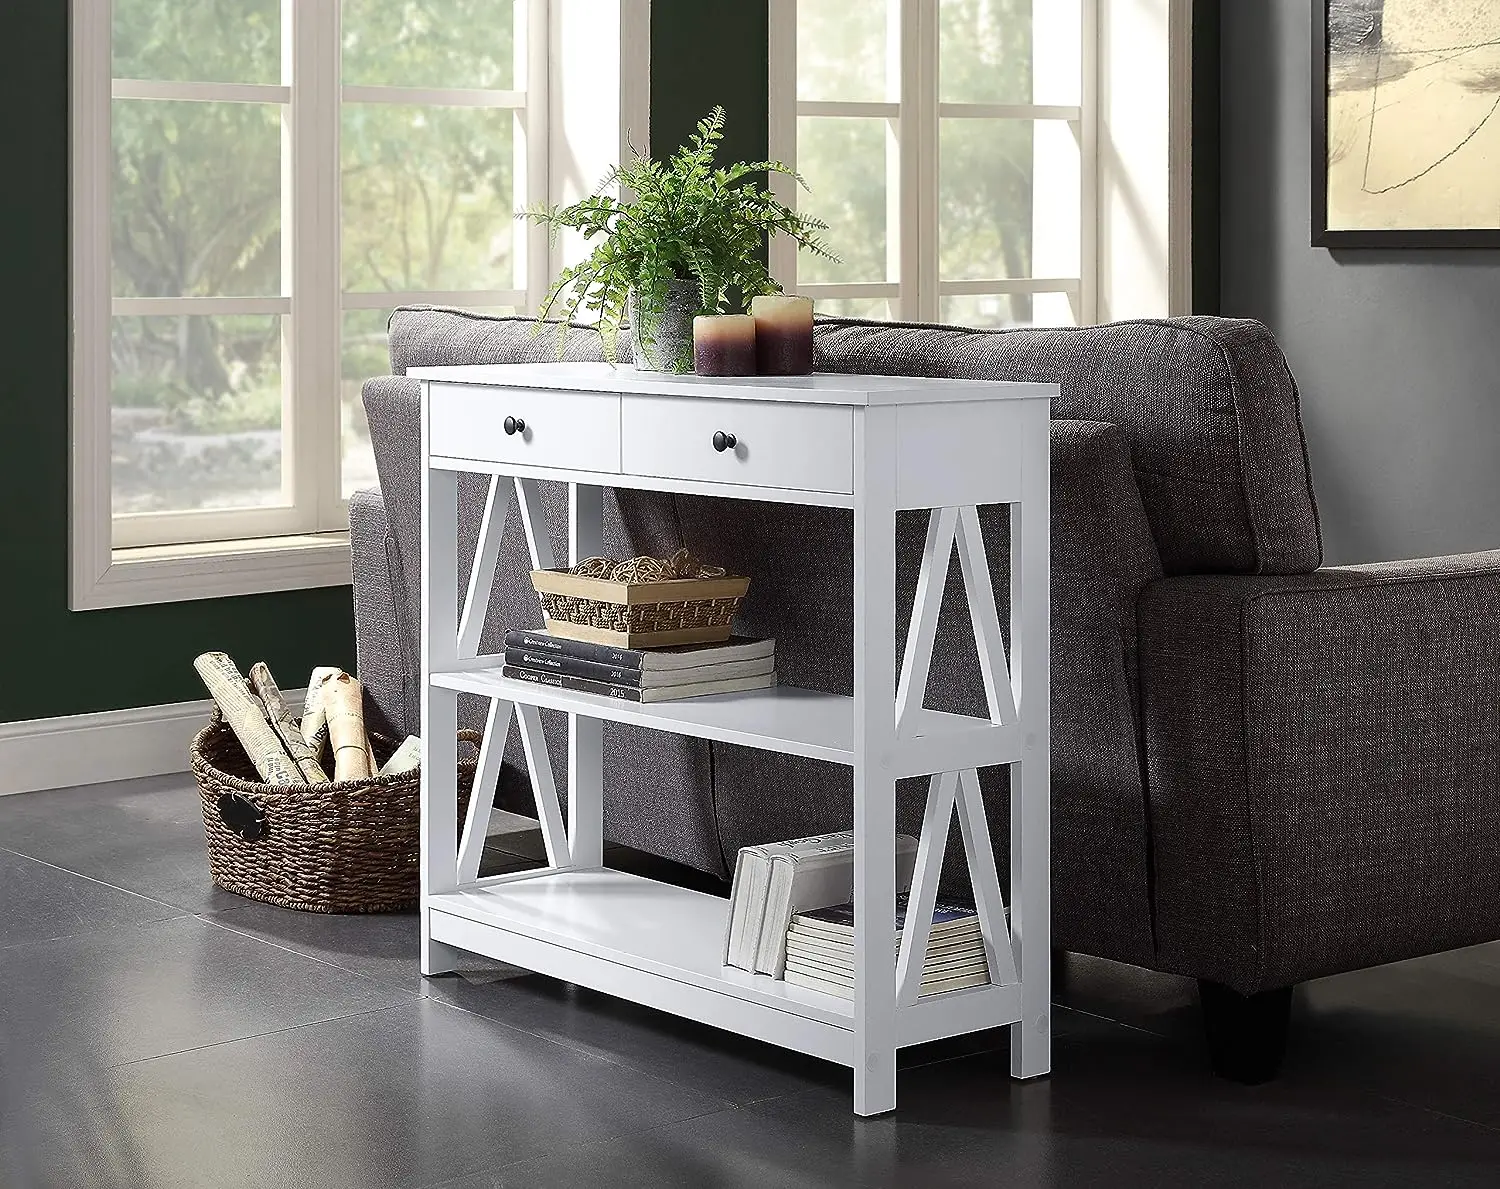 

Finish 3-Tier Console Sofa Entryway Table A-Design Sides with Shelf and Two Drawers by Linlamlim pillow cover